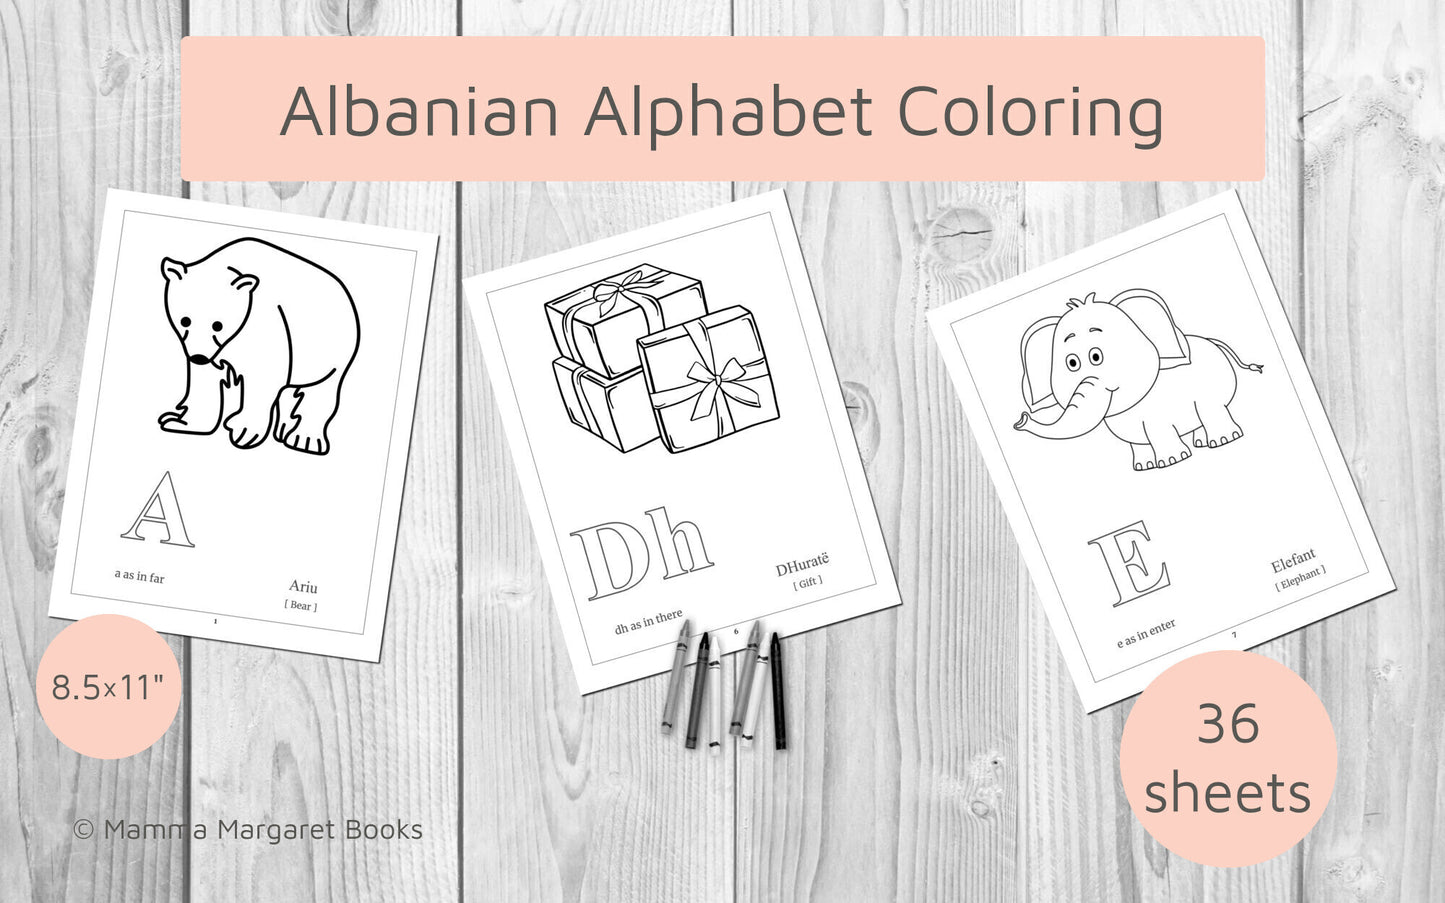 Albanian Alphabet Coloring Pages (36 pages), Printable Albanian Alphabet worksheet for Children, Albanian Coloring Pages